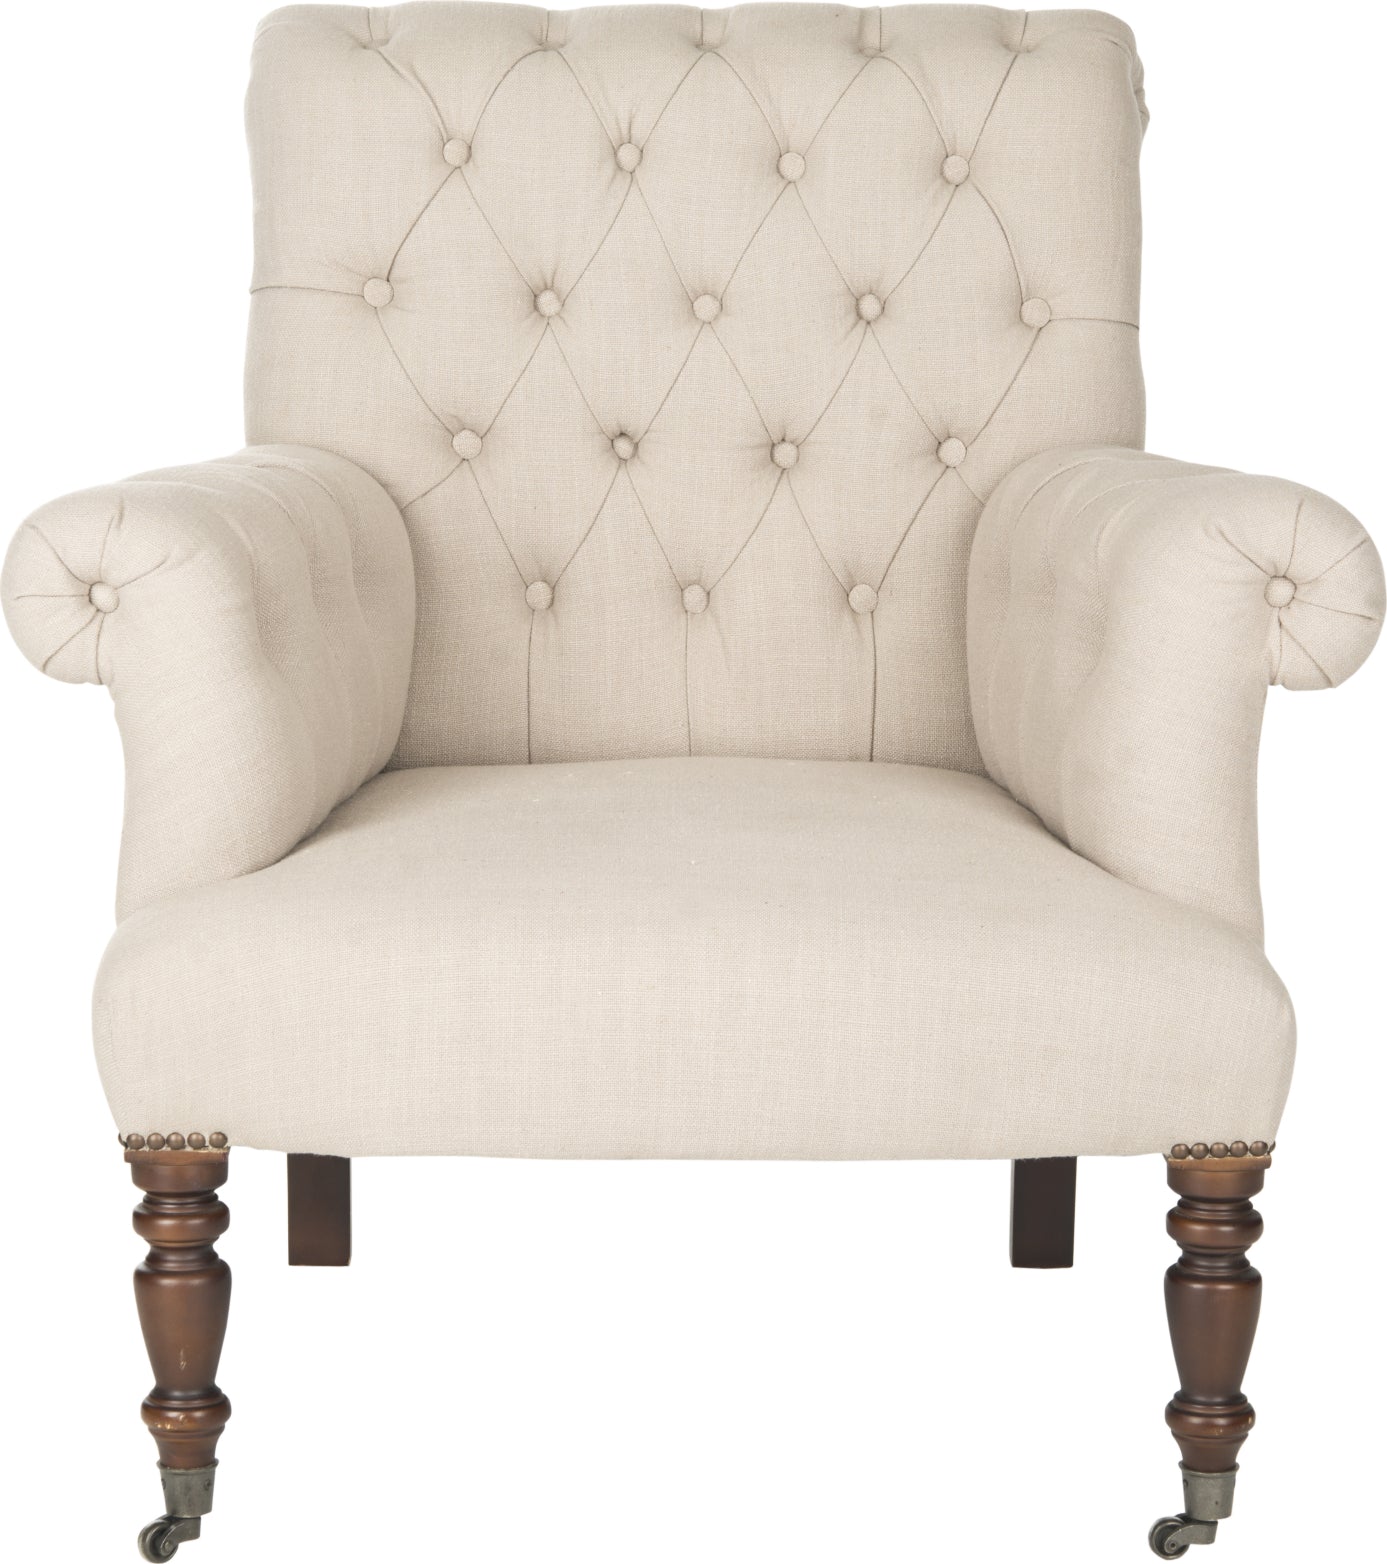 Safavieh Bennet Club Chair True Taupe and Black Furniture main image